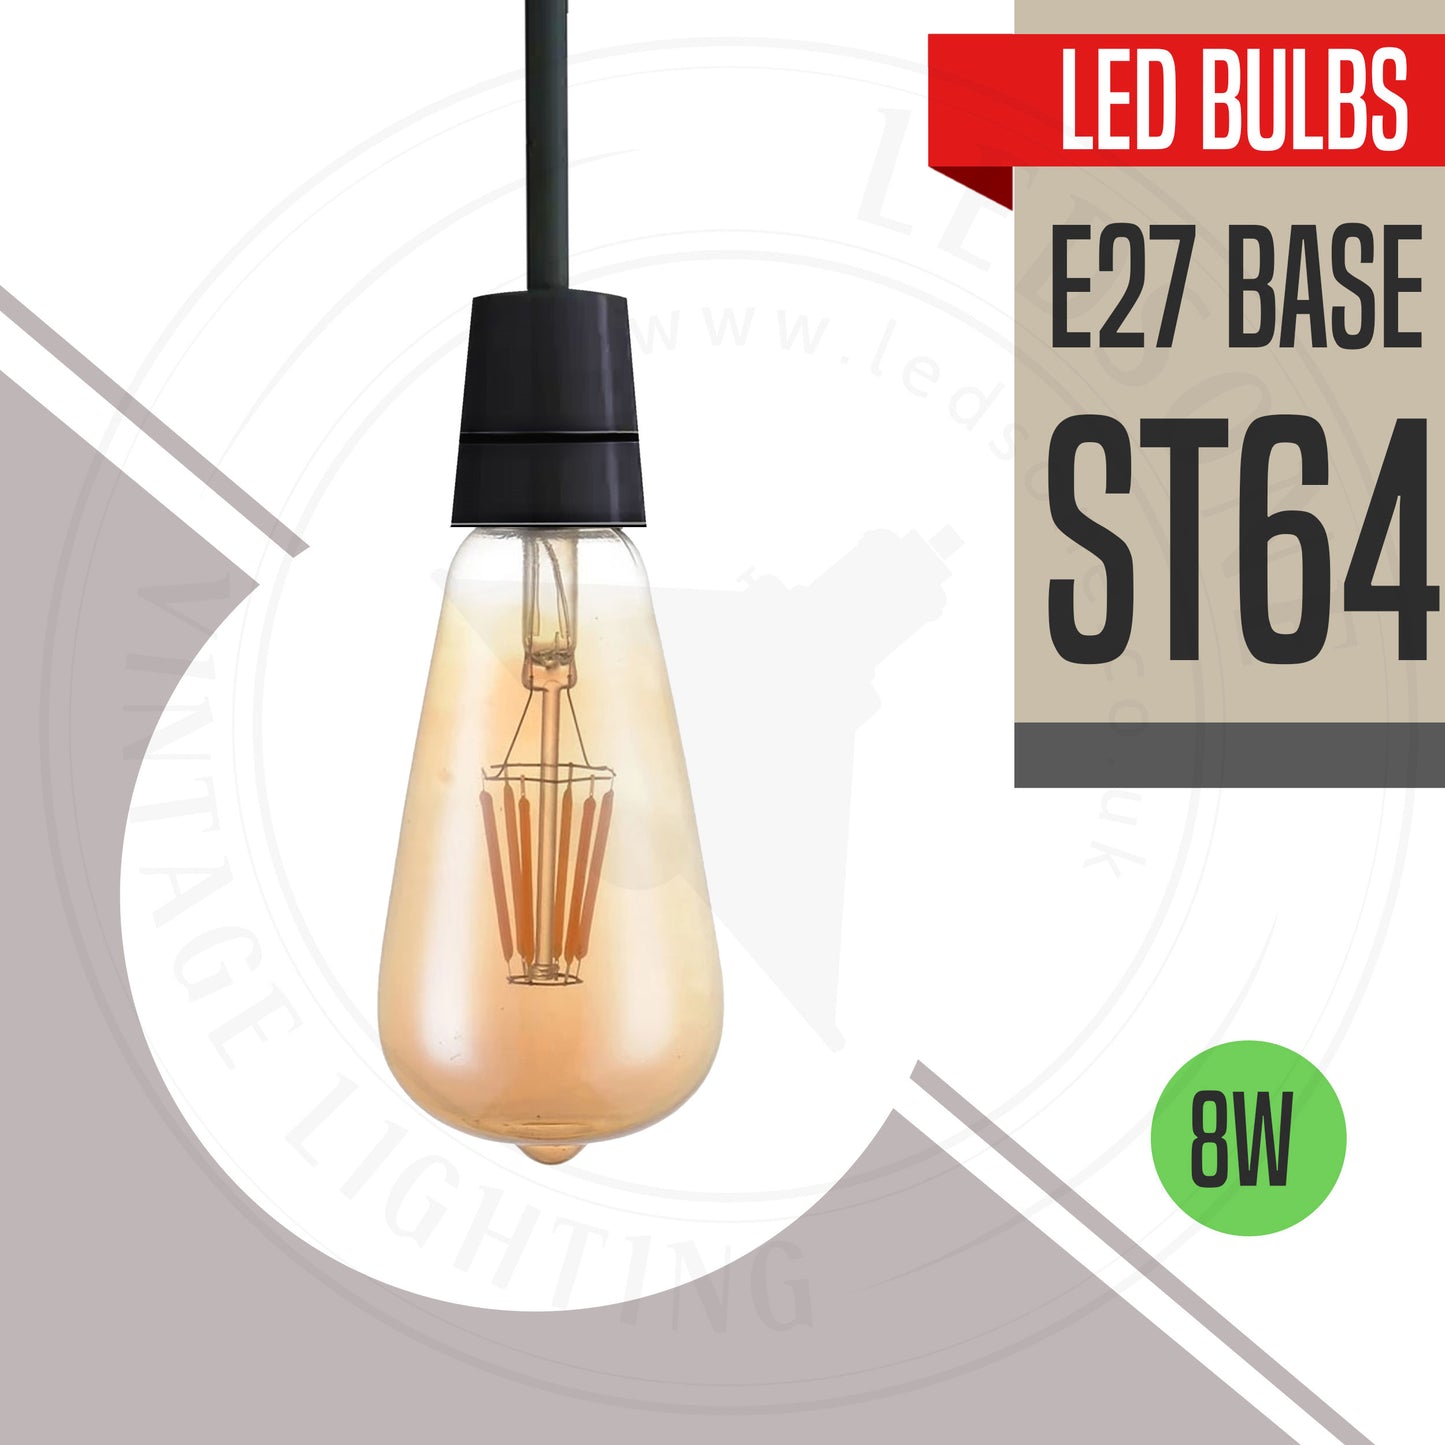 Industrial Dimmable ST64 E27 8W Vintage LED Light Filament Bulbs